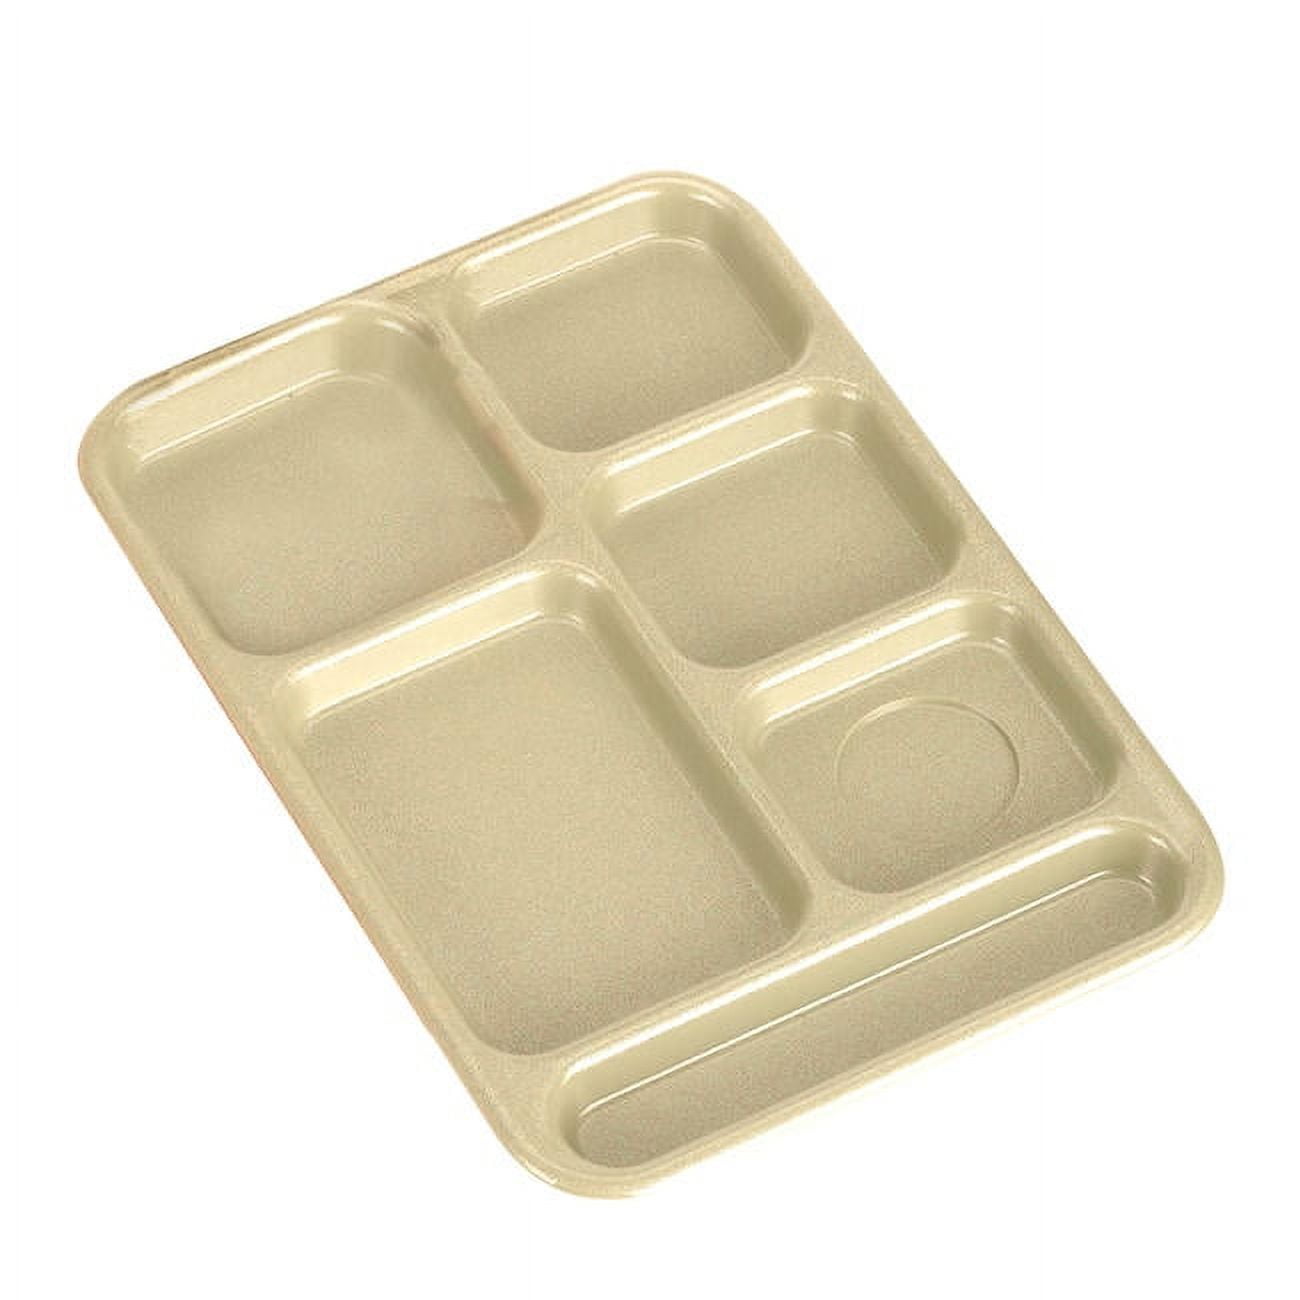 Cambro Penny-Saver Tan Co-Polymer Compartment Cafeteria Tray - 14L x 10W